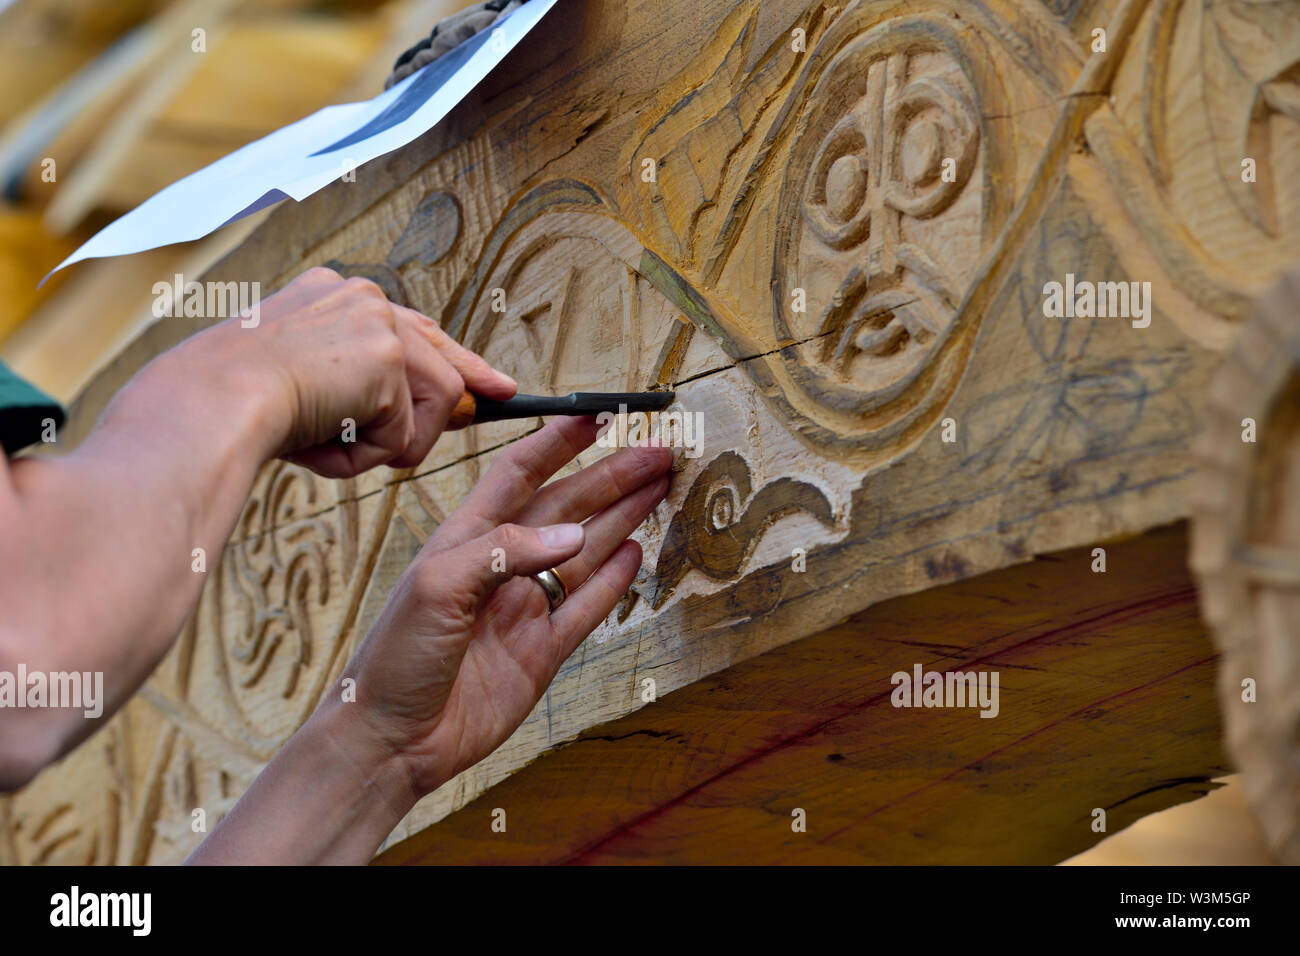 Carving motif into oak beam on traditional reconstruction of medieval timber framed hall Stock Photo